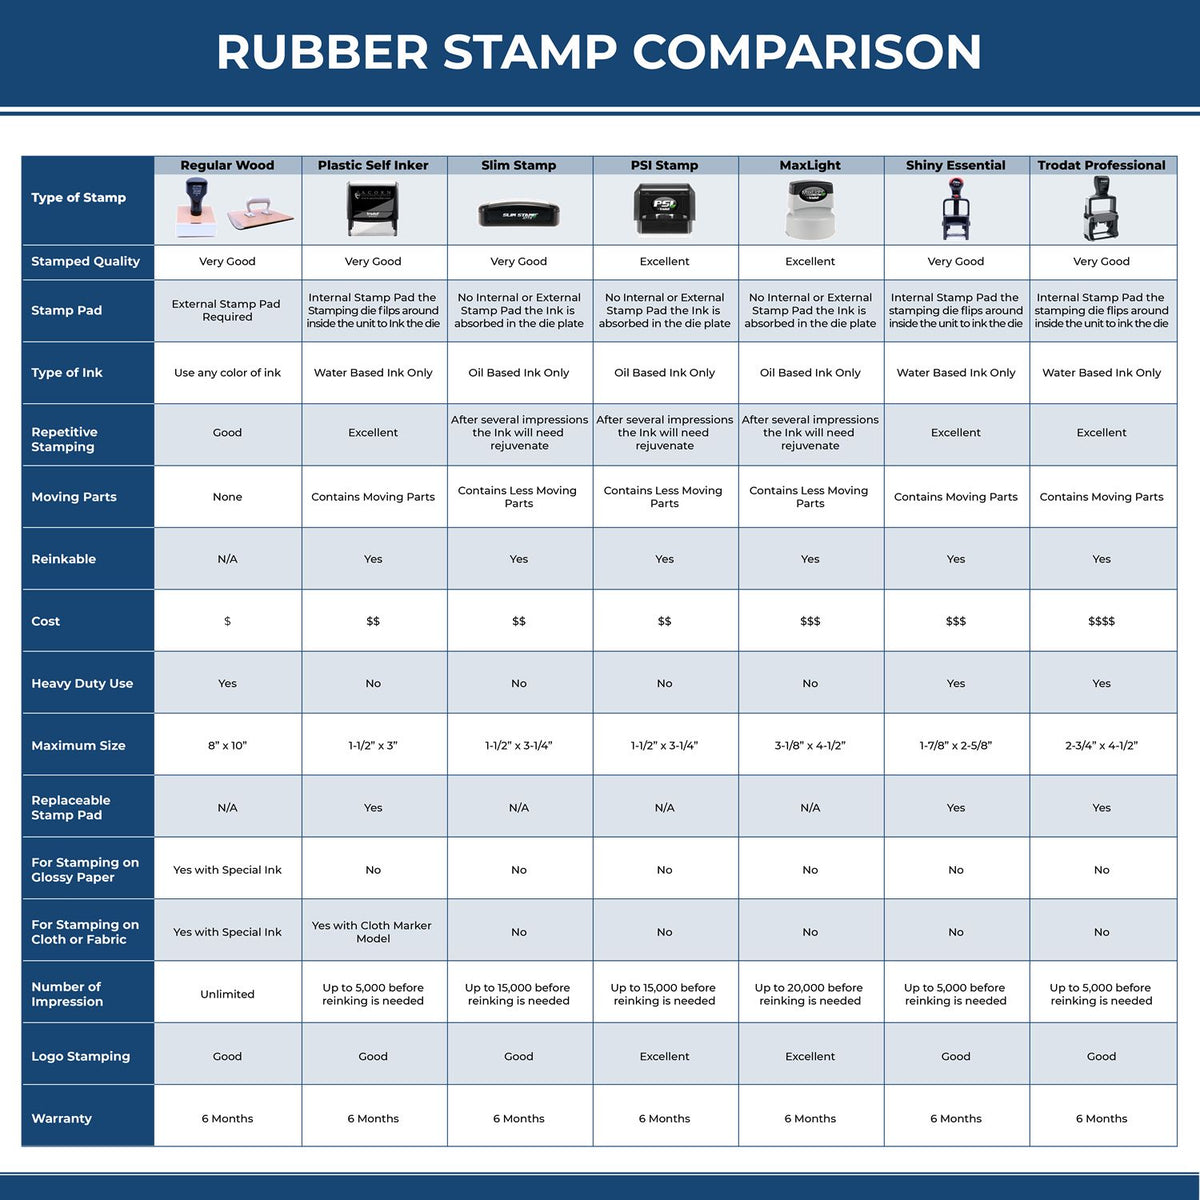 A comparison chart for the different types of mount models available for the Super Slim Utah Notary Public Stamp.